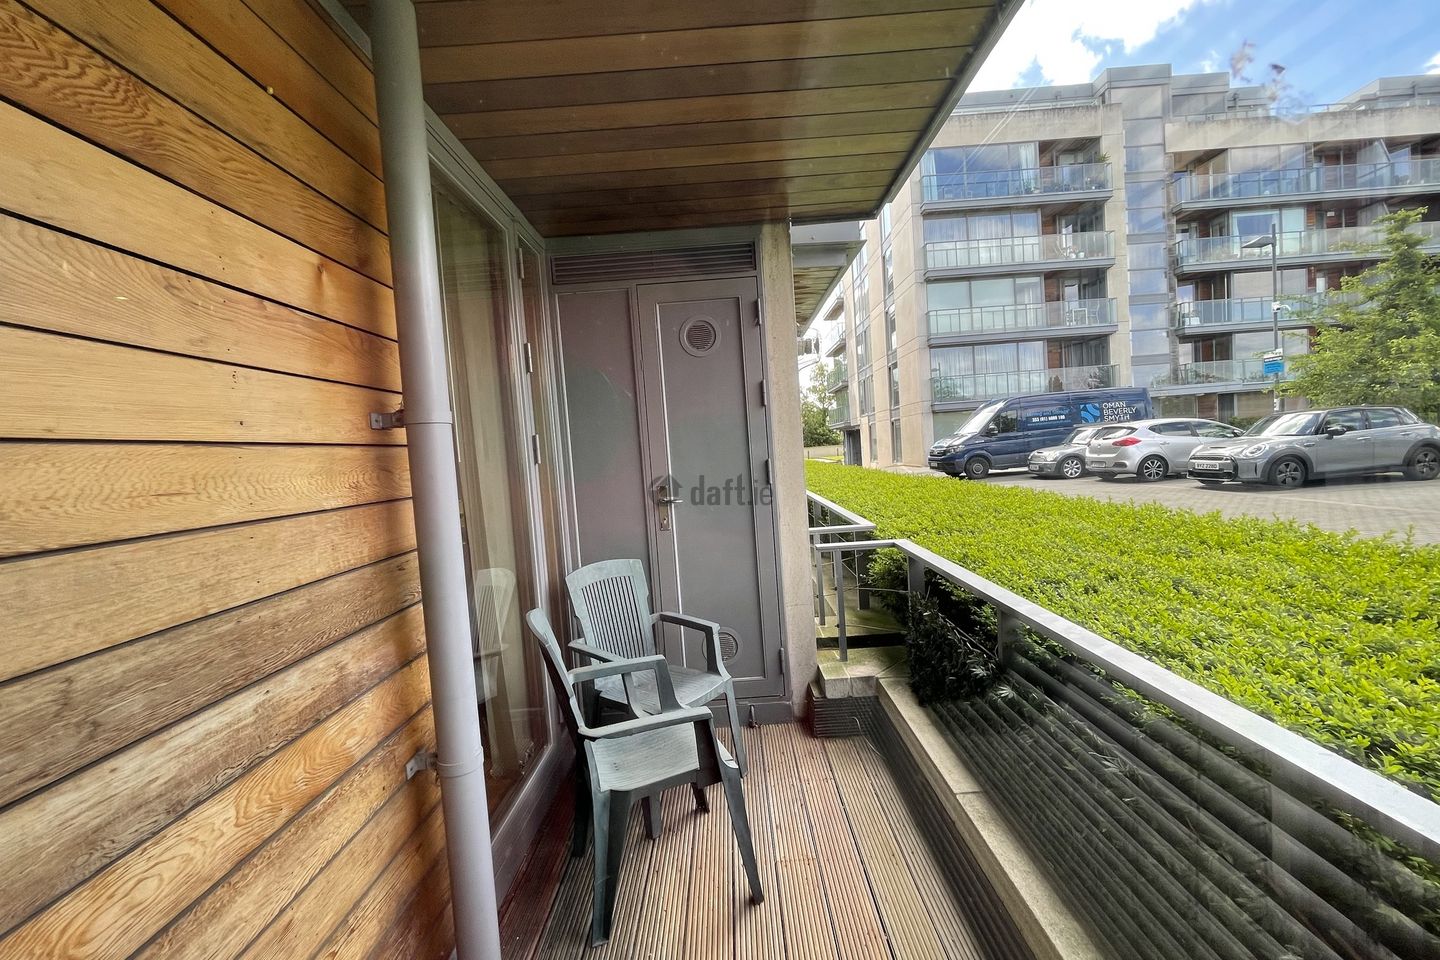 Apartment 17, Lapwing, Booterstown, Co. Dublin